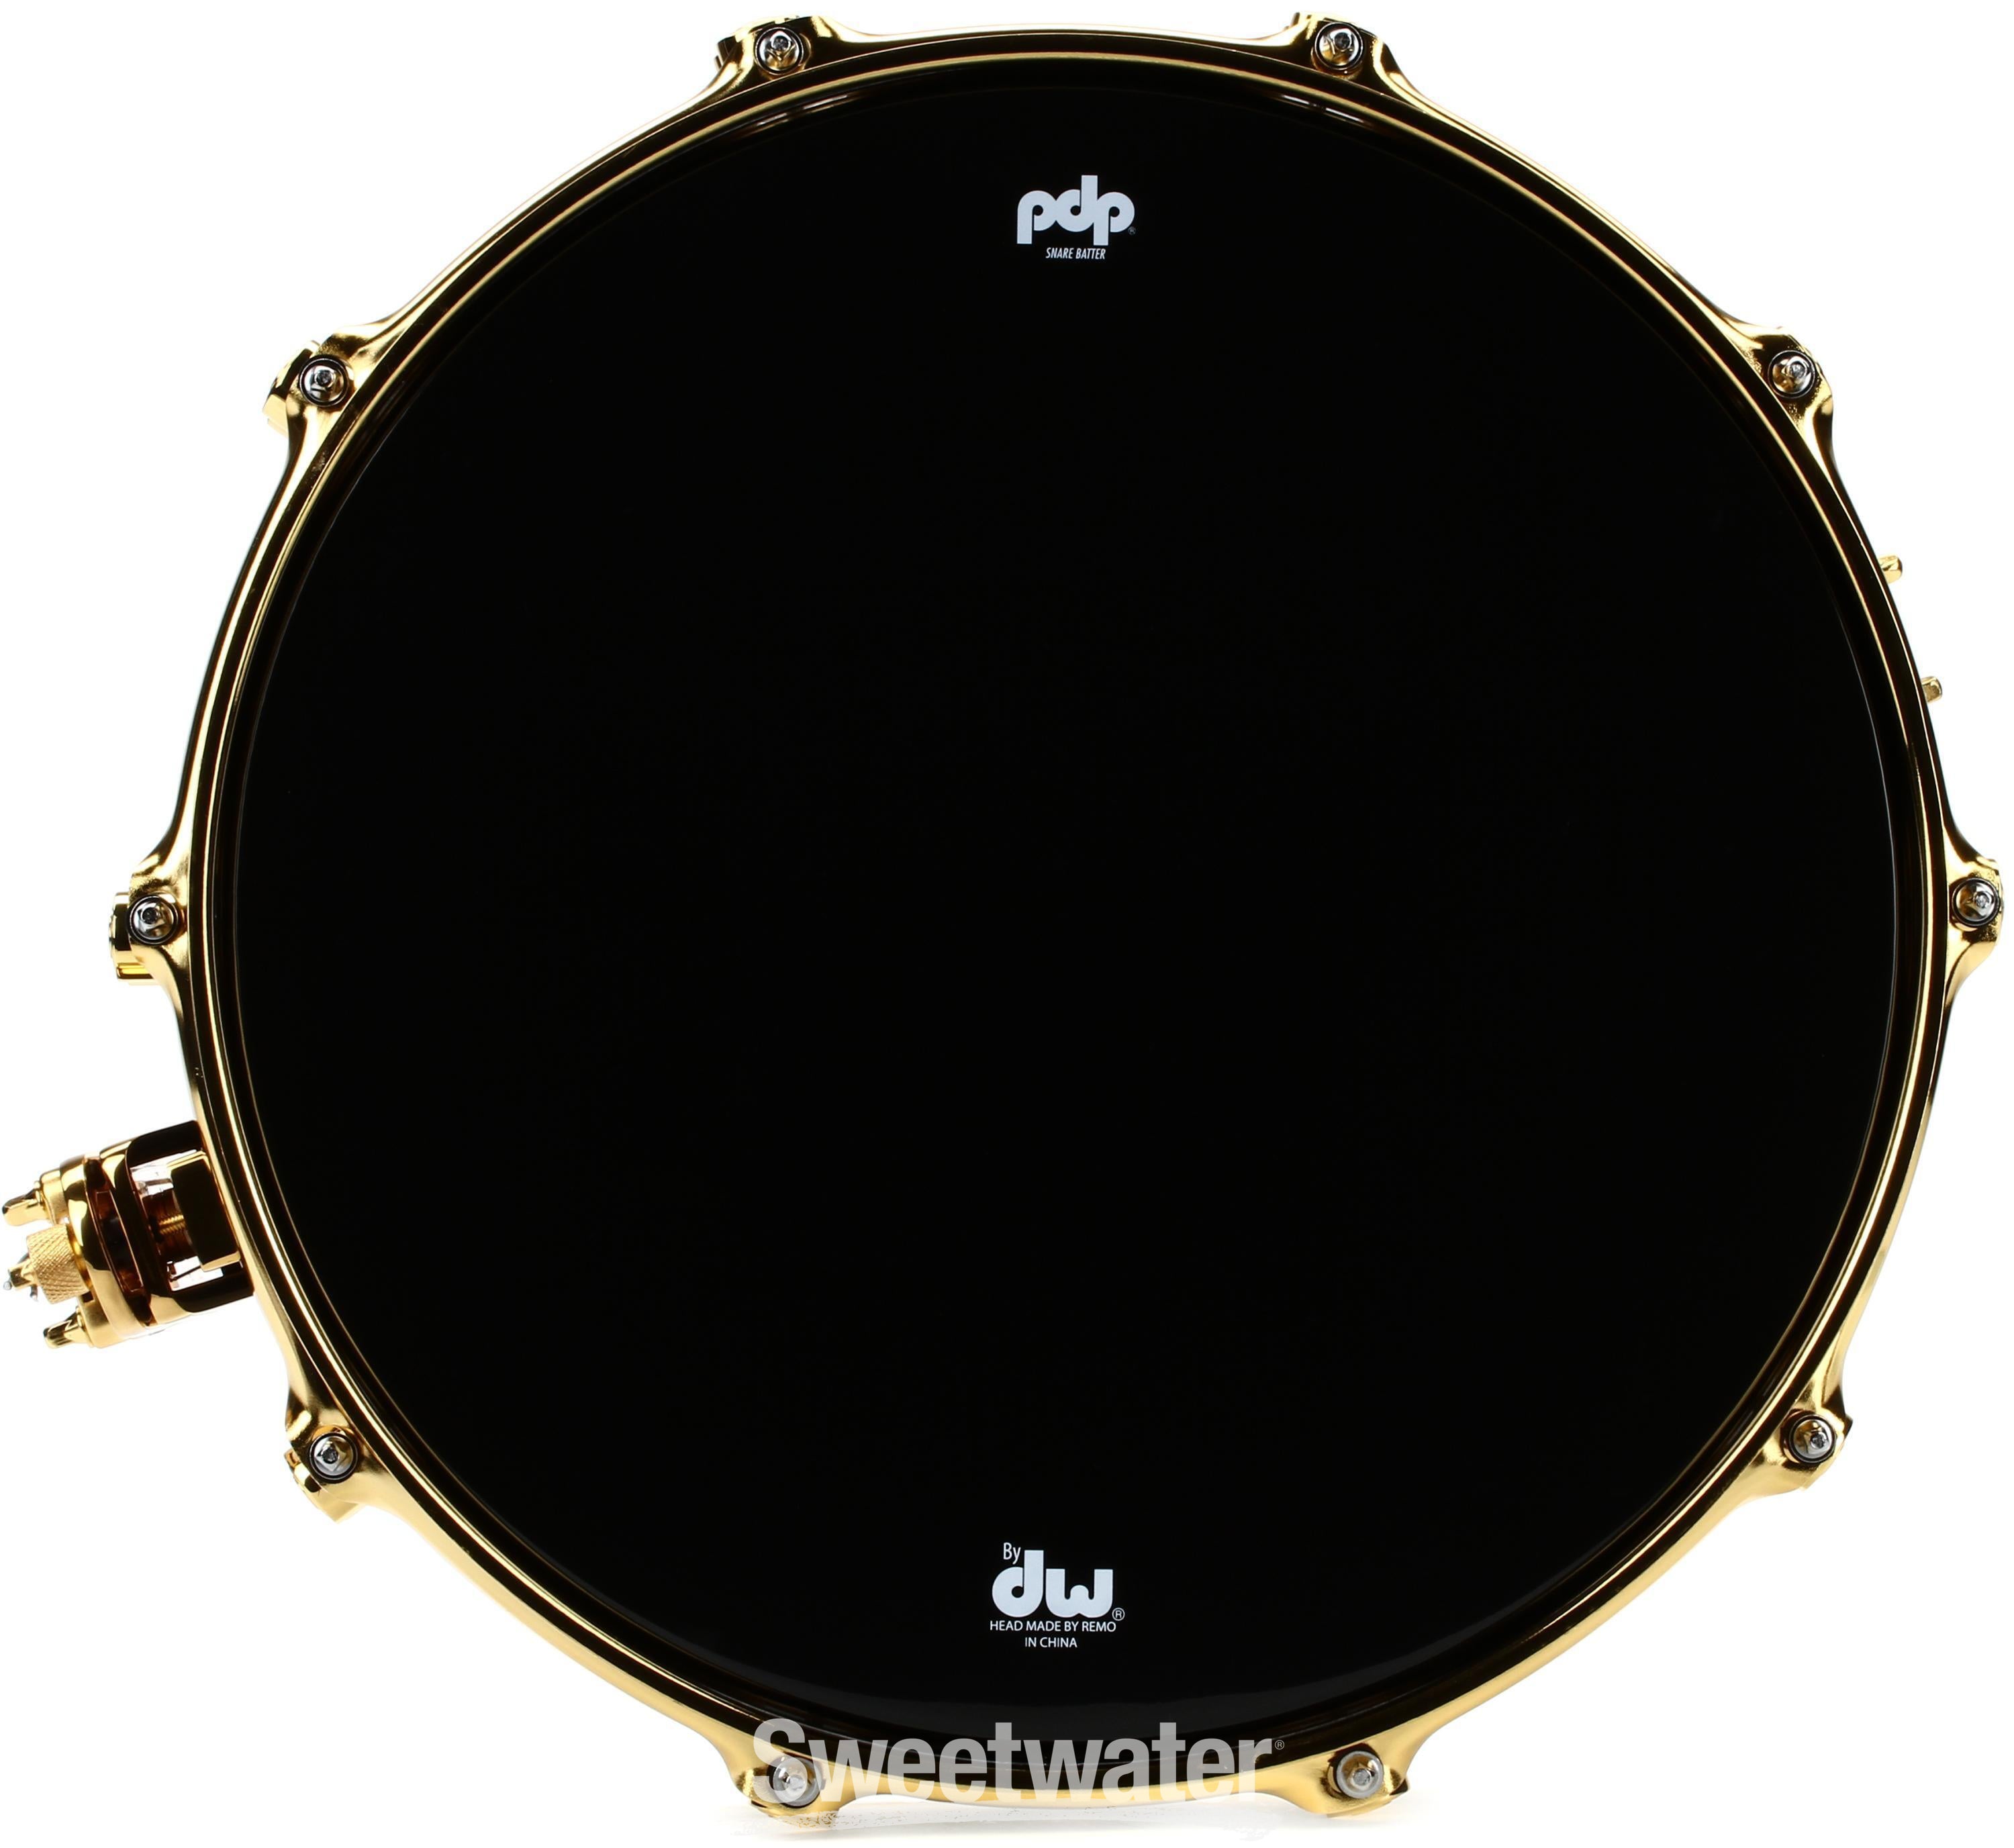 Eric Hernandez Signature Snare Drum - 4 x 14-inch - Black - Sweetwater